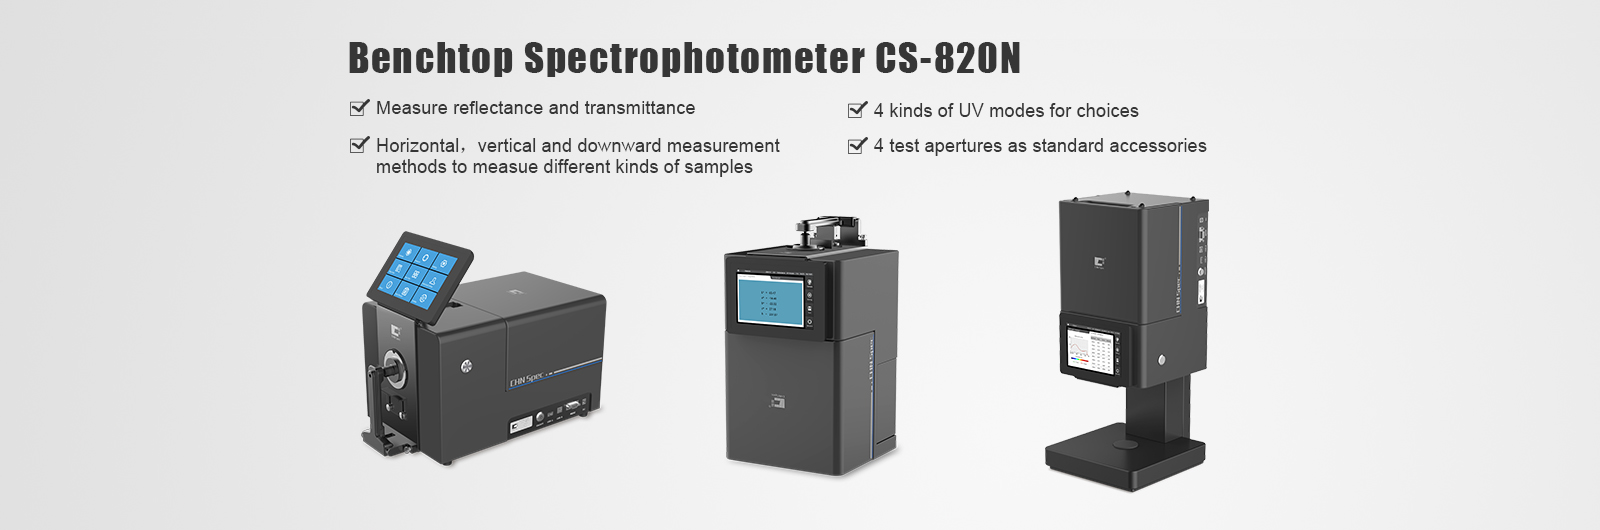 CHNS Benchtop Spectrophotometer